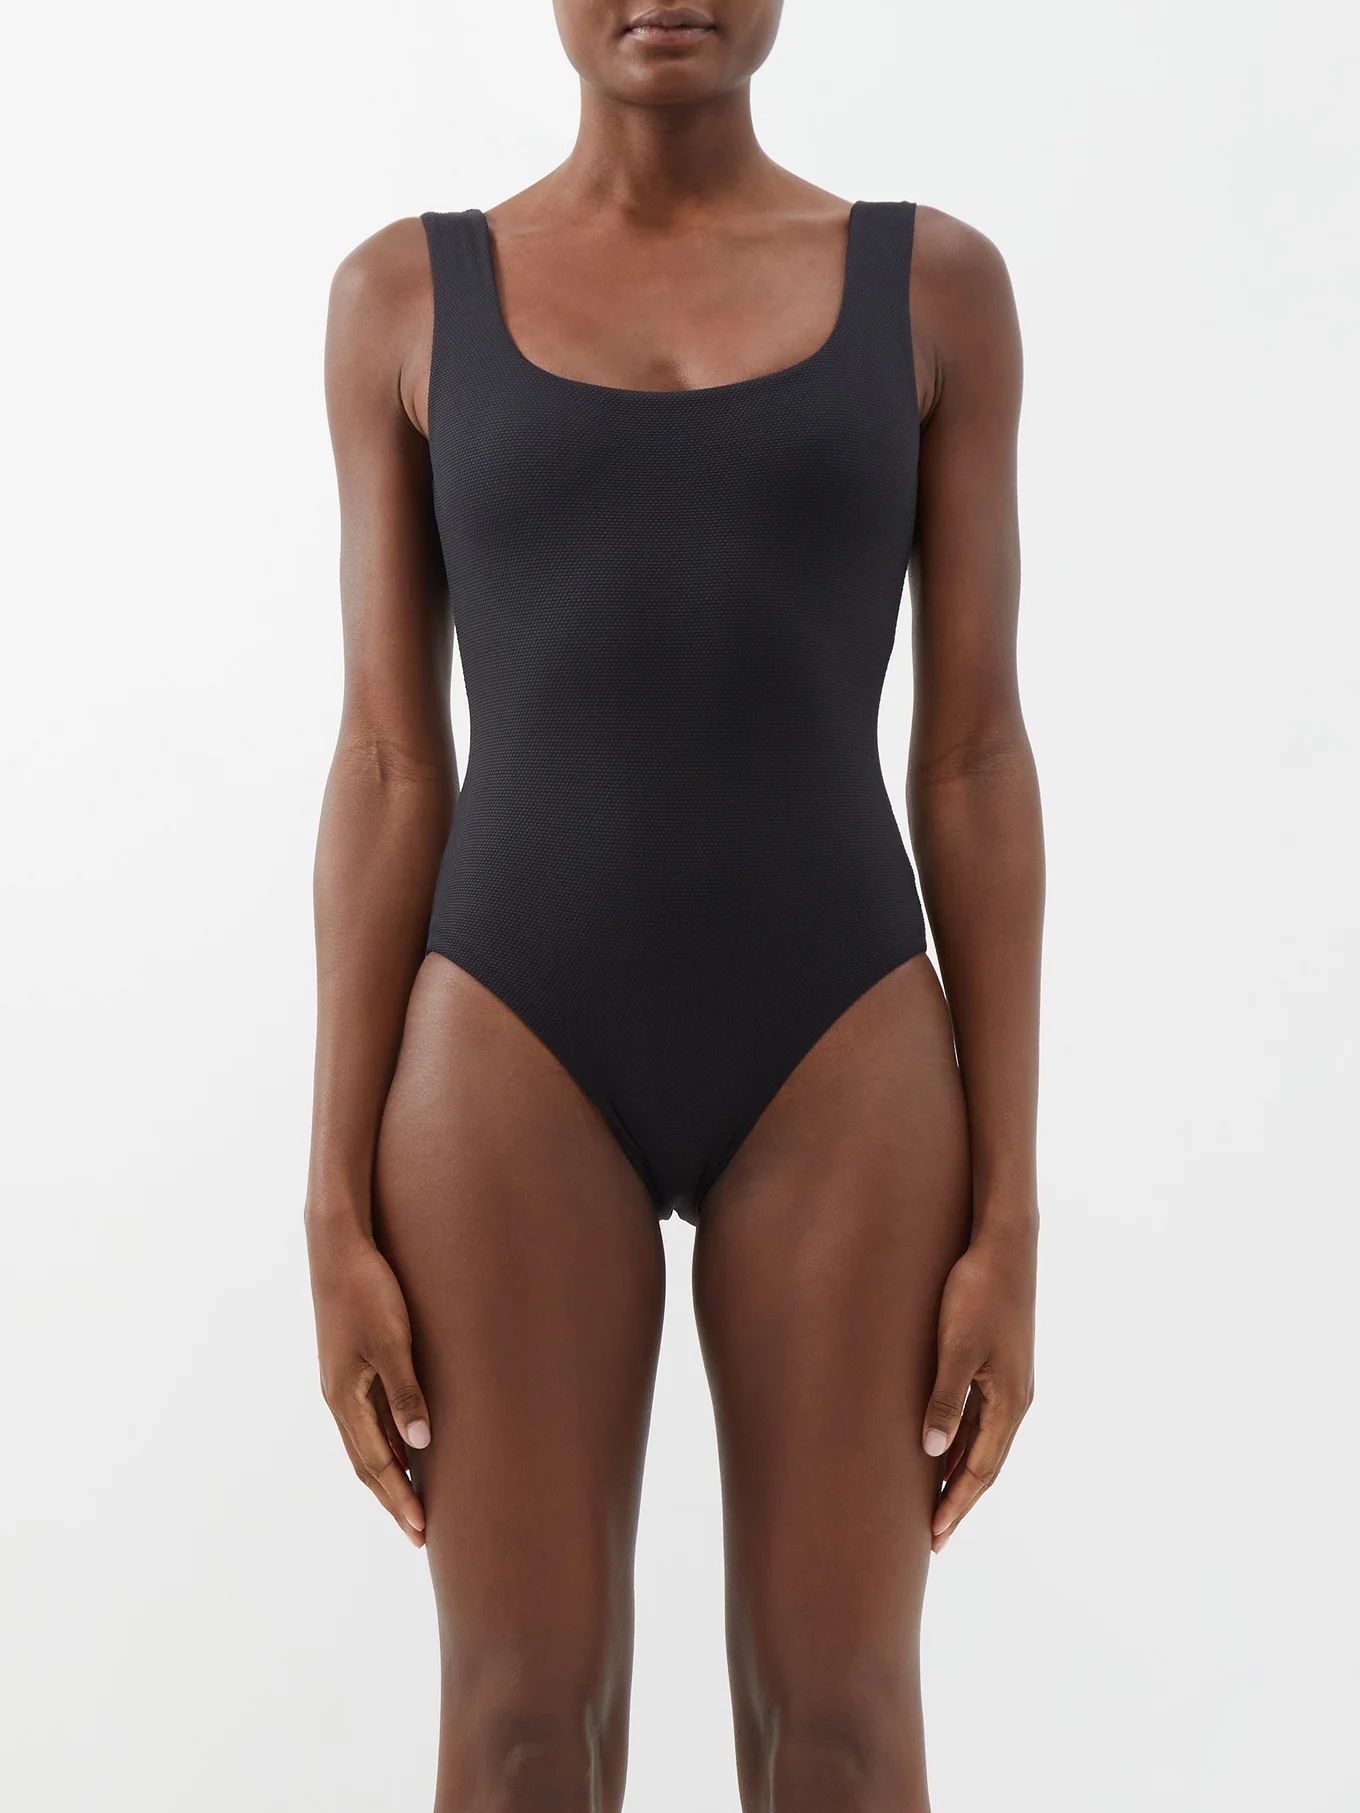 The Poppy swimsuit | Matches (US)